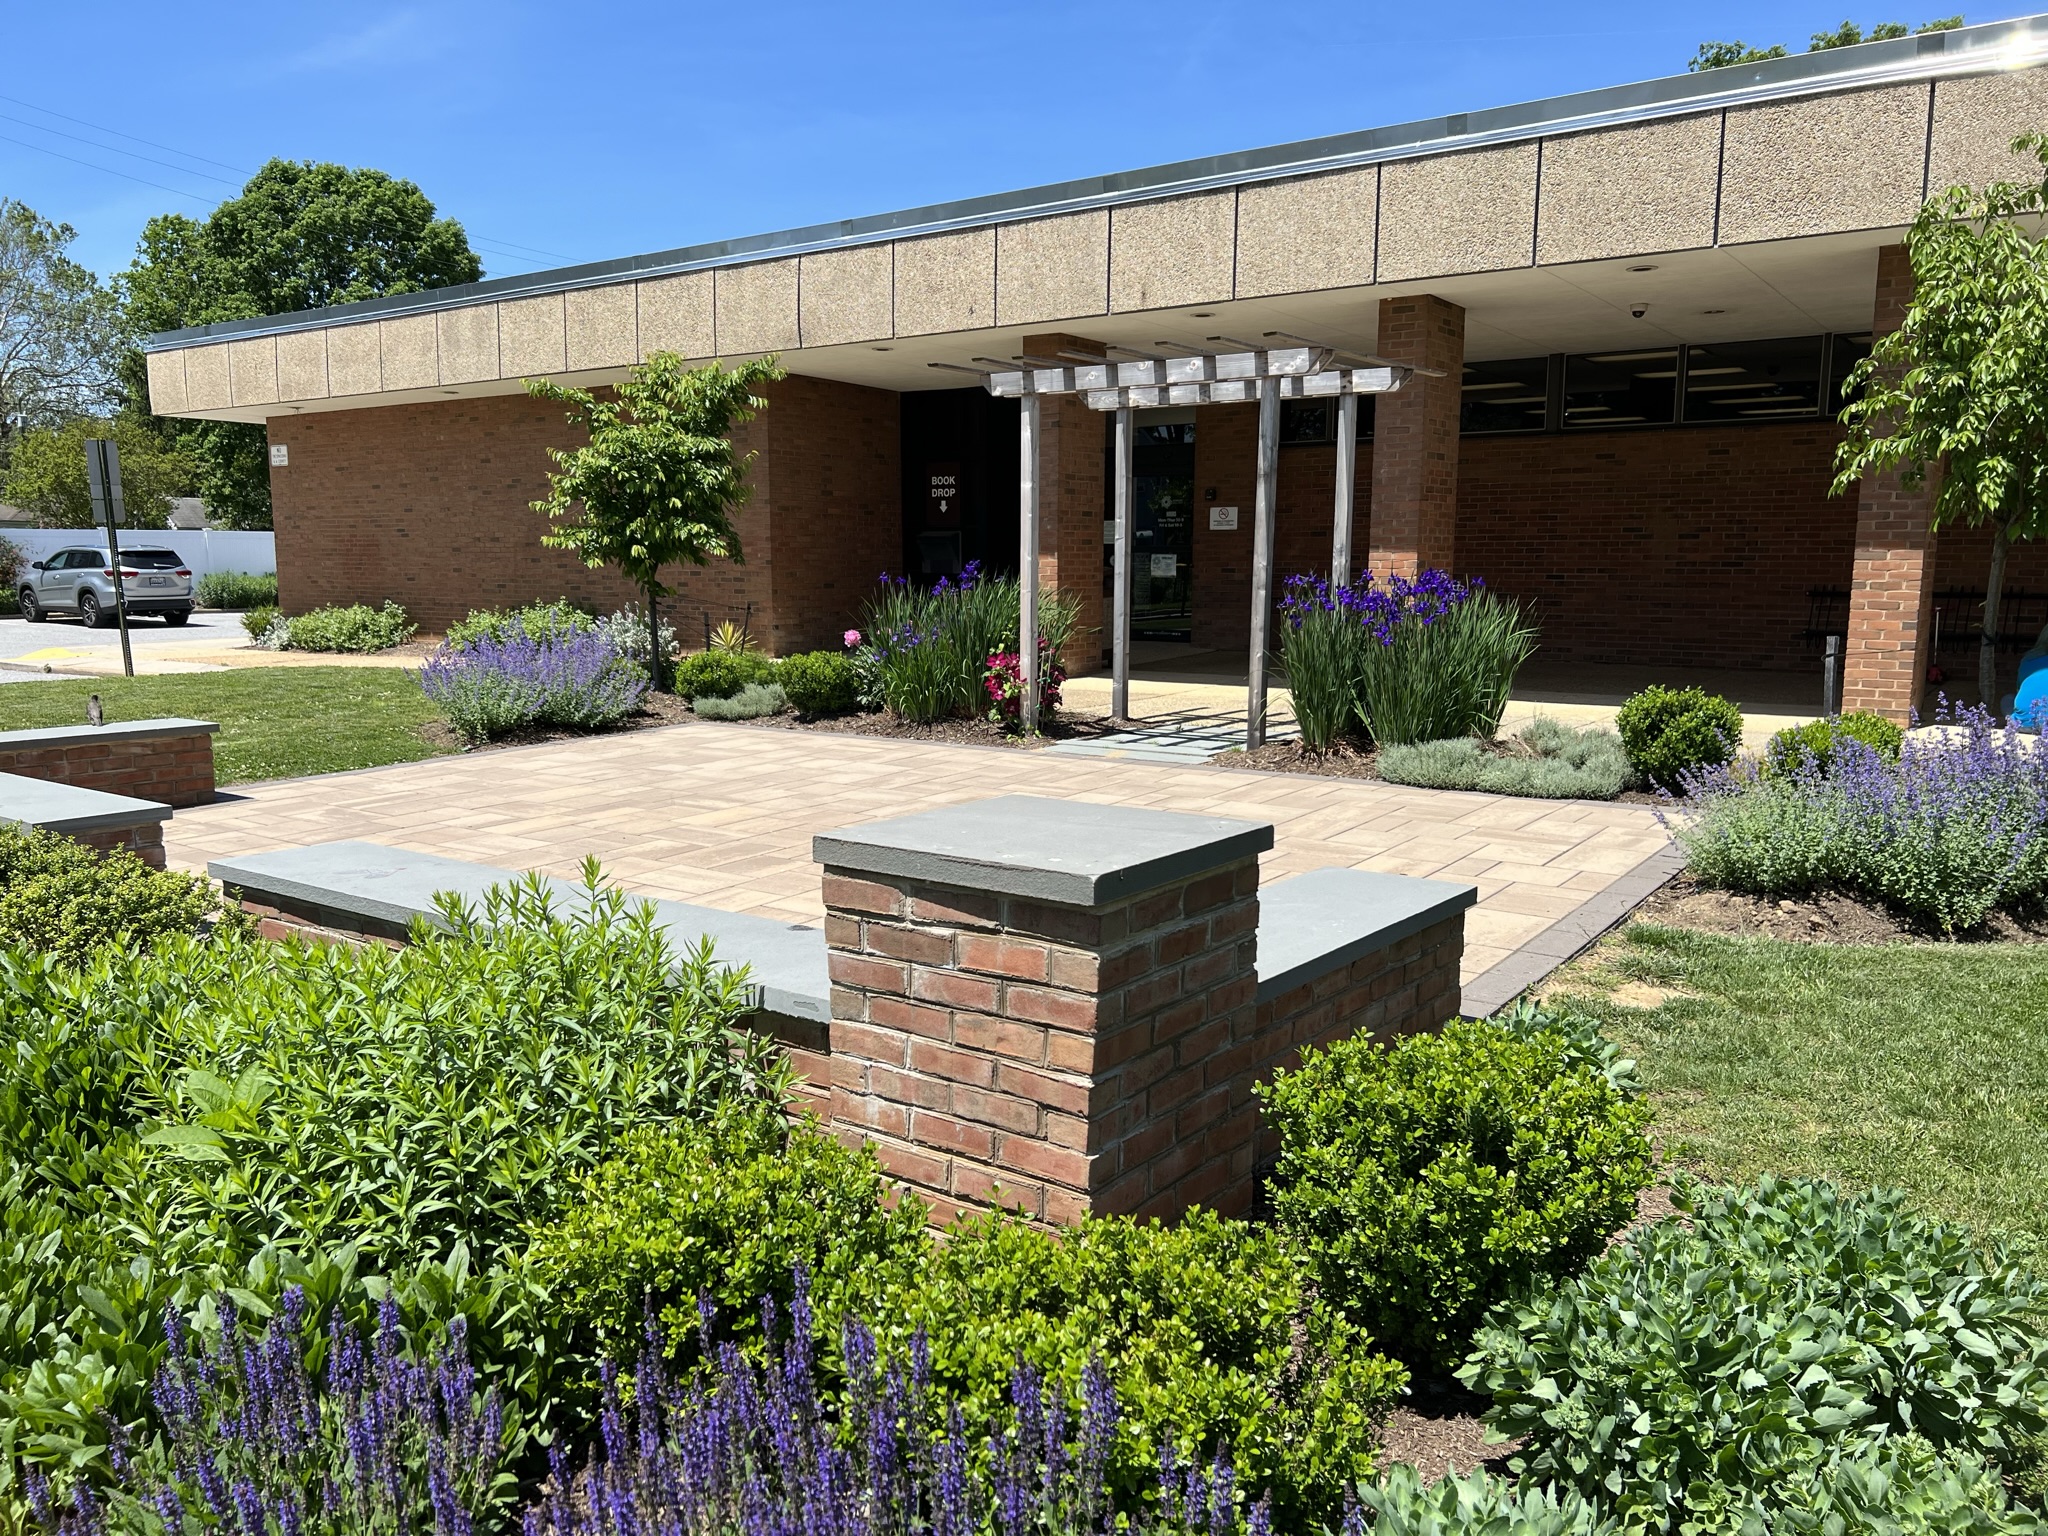 Linthicum Library and Garden